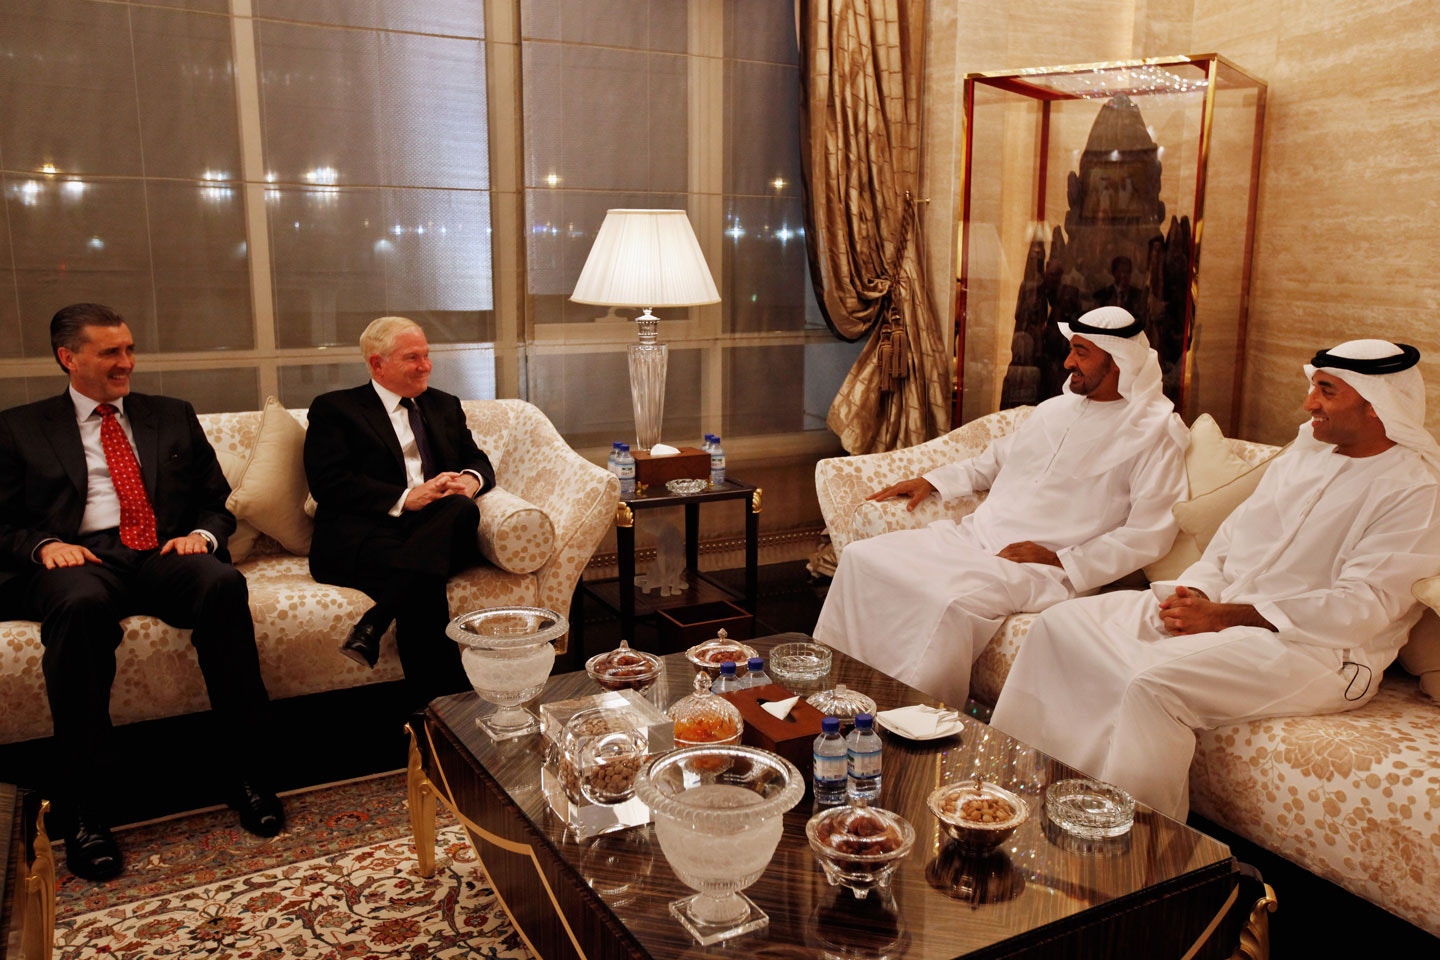 ABU DHABI, UNITED ARAB EMIRATES - APRIL 08:  U.S. Defense Secretary Robert Gates (2nd L) meets with Mohammed bin Zayed bin Sultan Al Nahyan (2nd R), the Crown Prince of Abu Dhabi and Deputy Supreme Commander of the United Arab Emirates Armed Forces, U.S. Ambassador to the UAE Richard Olson (L) and UAE Ambassador to the U.S. Yousef Al Otaiba (R) at the crown prince's home, the Mina Palace, April 8, 2011 in Abu Dhabi, United Arab Emirates. Gates visited Saudi Arabia and Iraq on this trip and will discuss the bilateral defense, and the unrest that is gripping the Mideast and Iran with the crown prince.  (Photo by Chip Somodevilla/Getty Images)